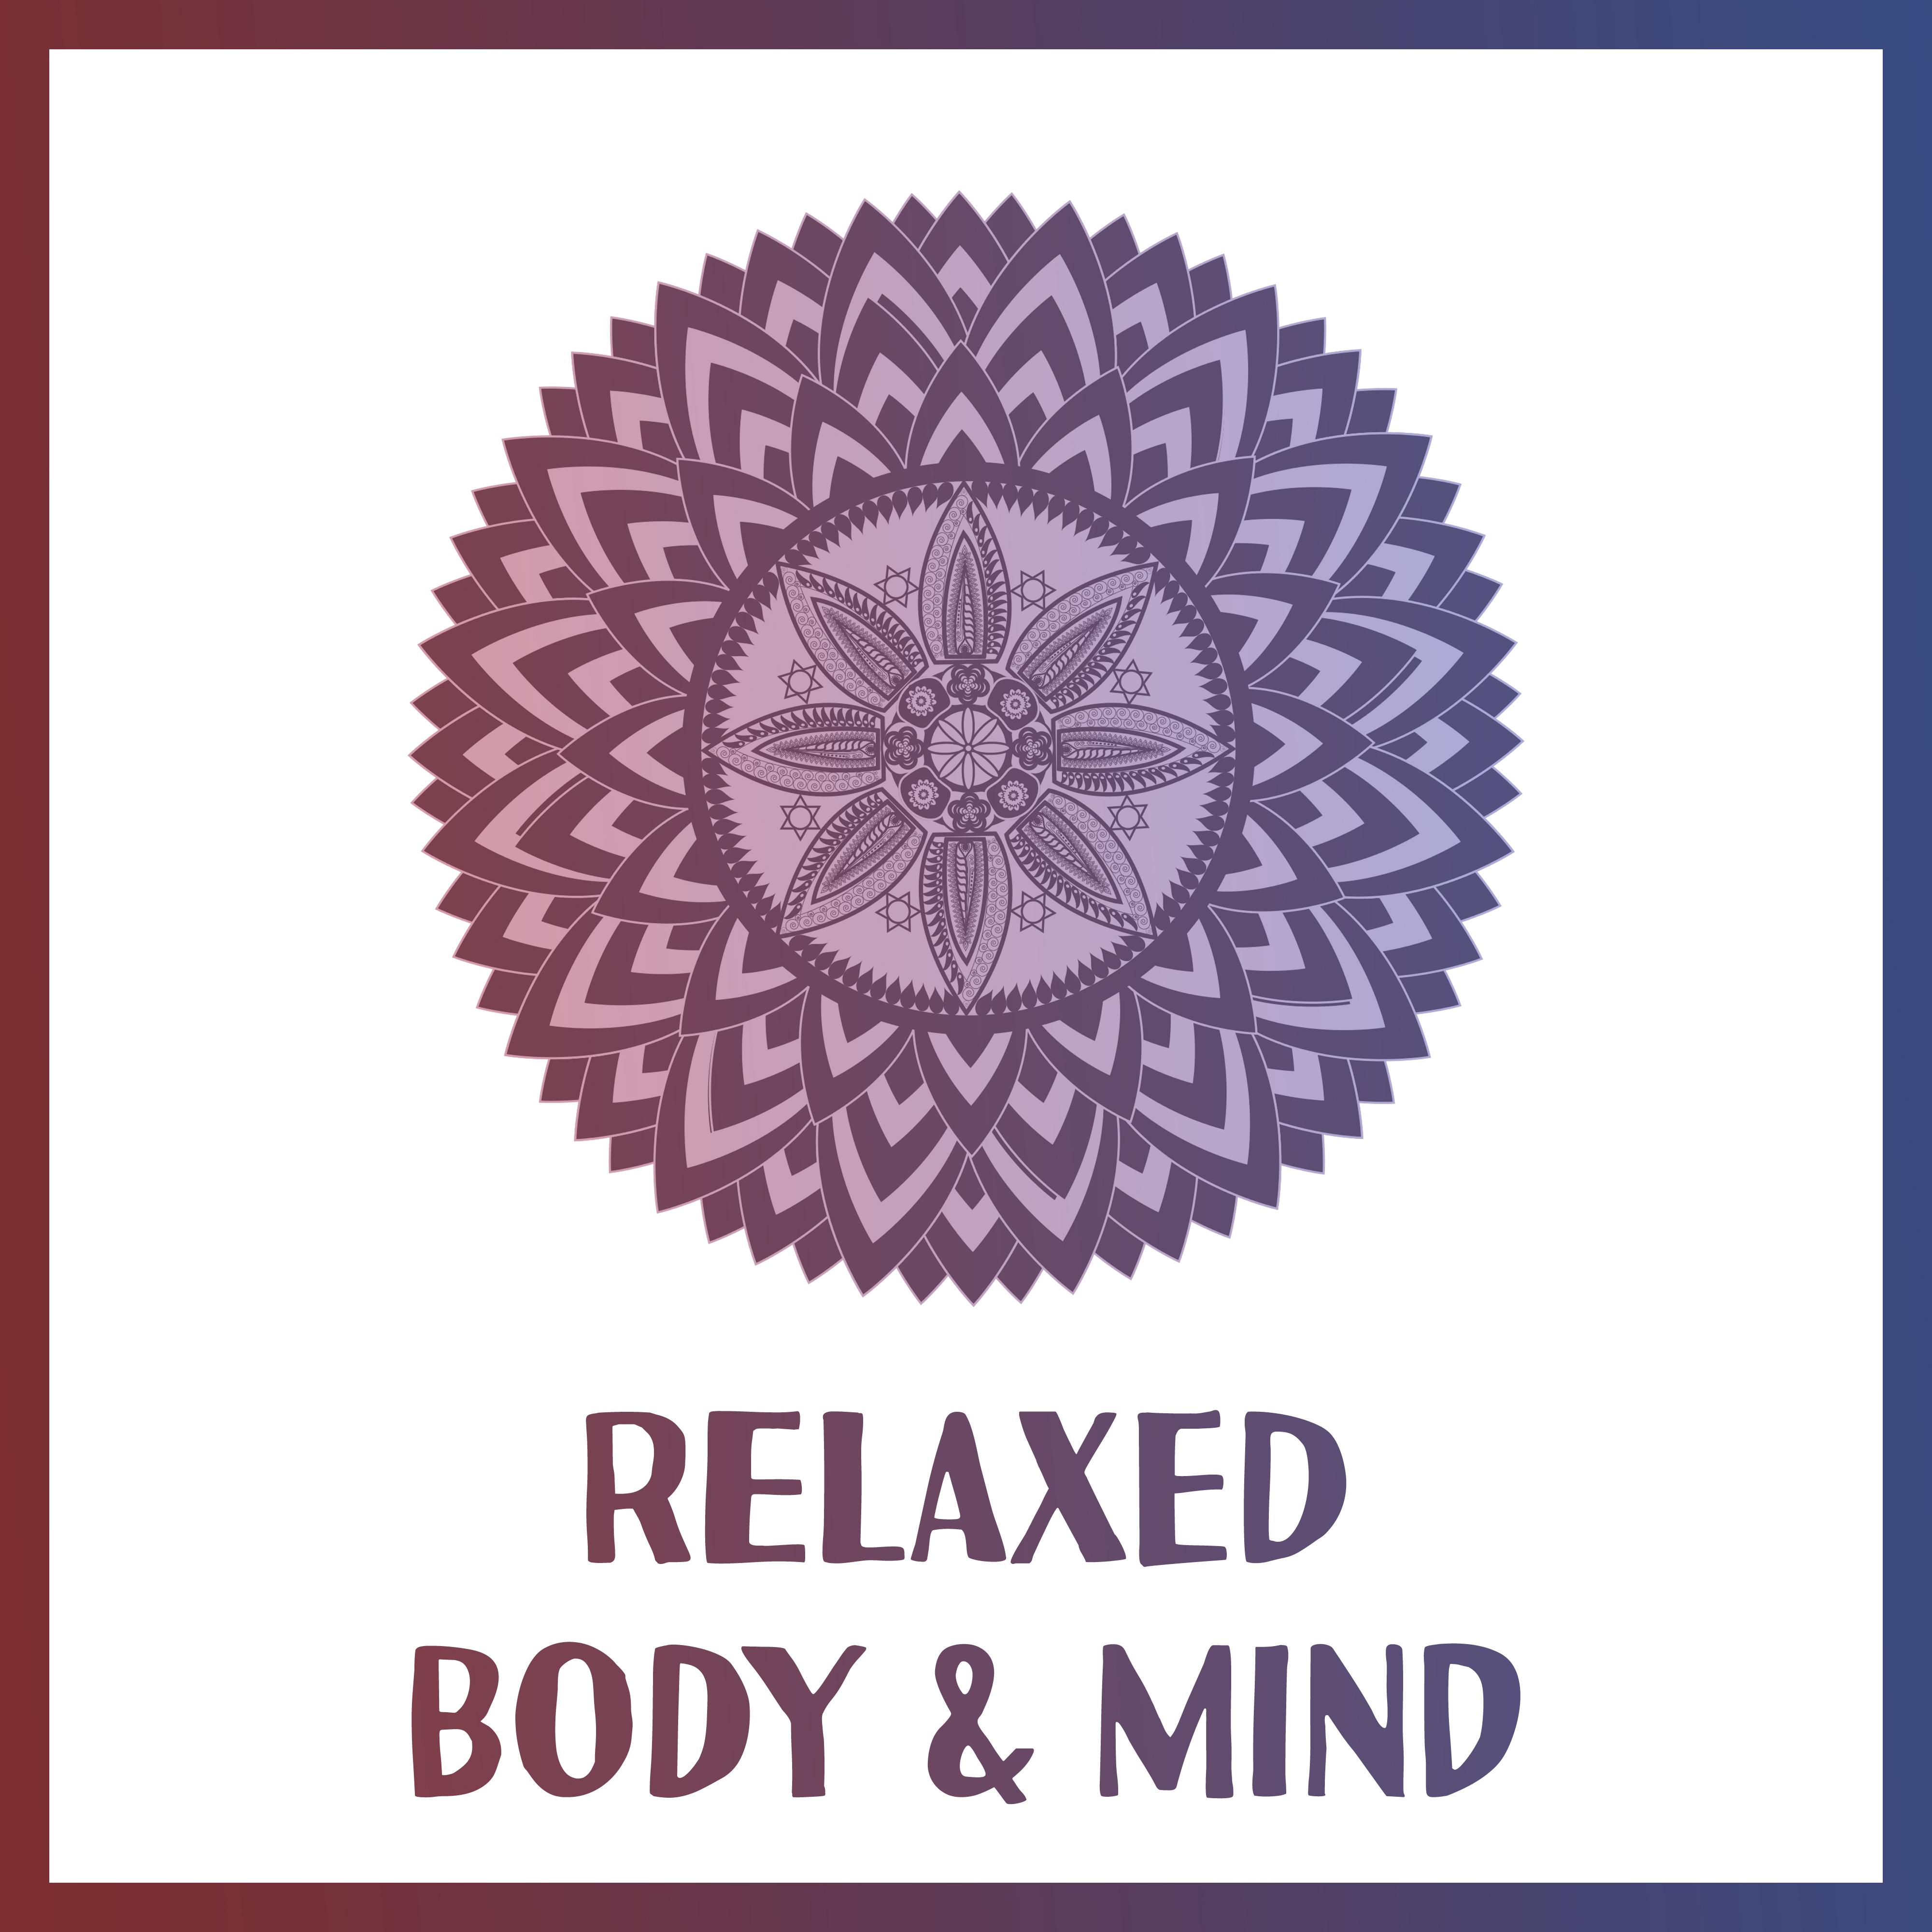 Relaxed Body & Mind – Yoga Music, New Age for Meditation, Pilates, Stress Relief, Rest & Relax